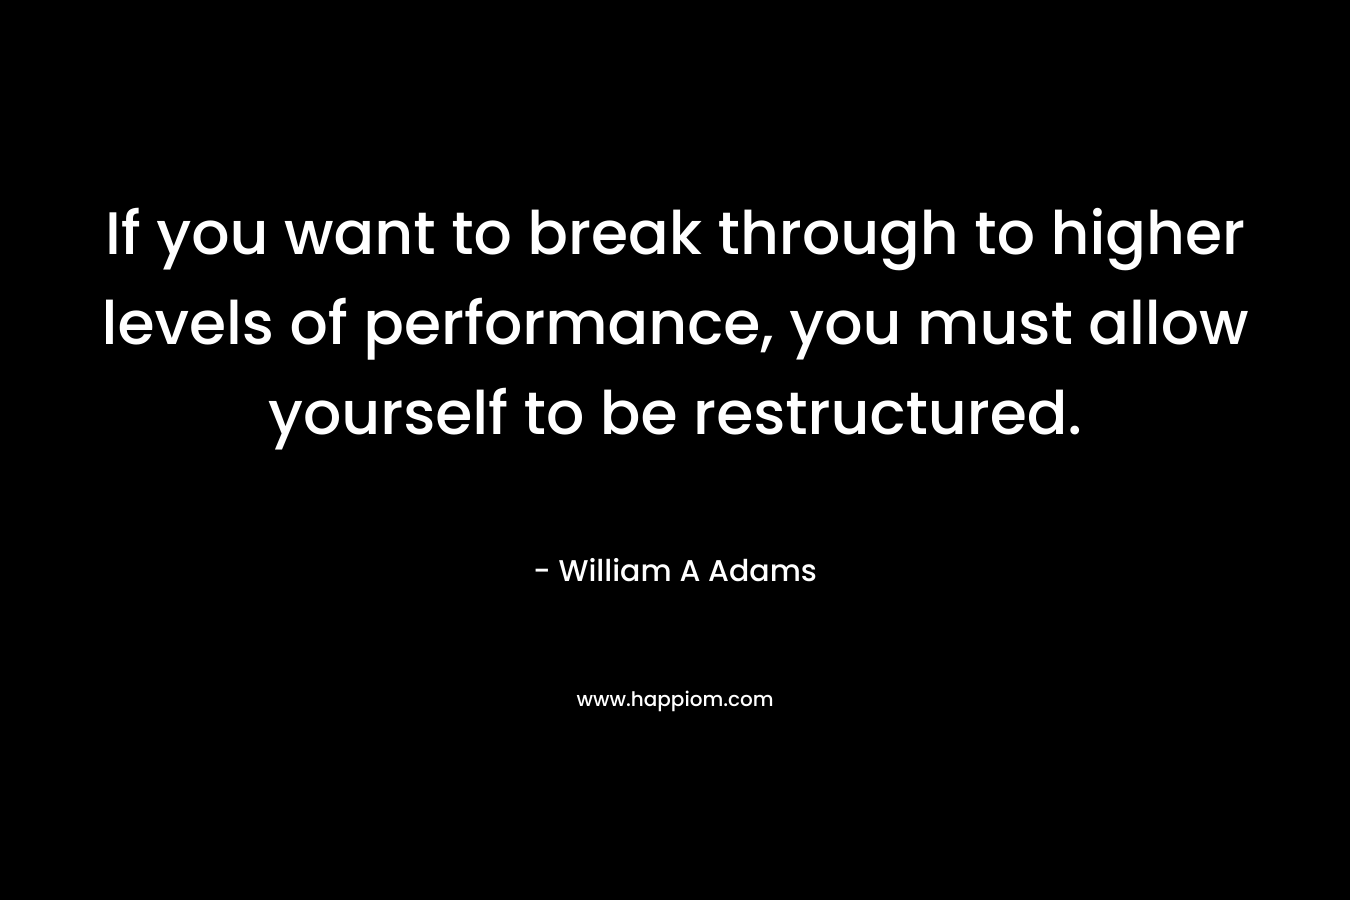 If you want to break through to higher levels of performance, you must allow yourself to be restructured.